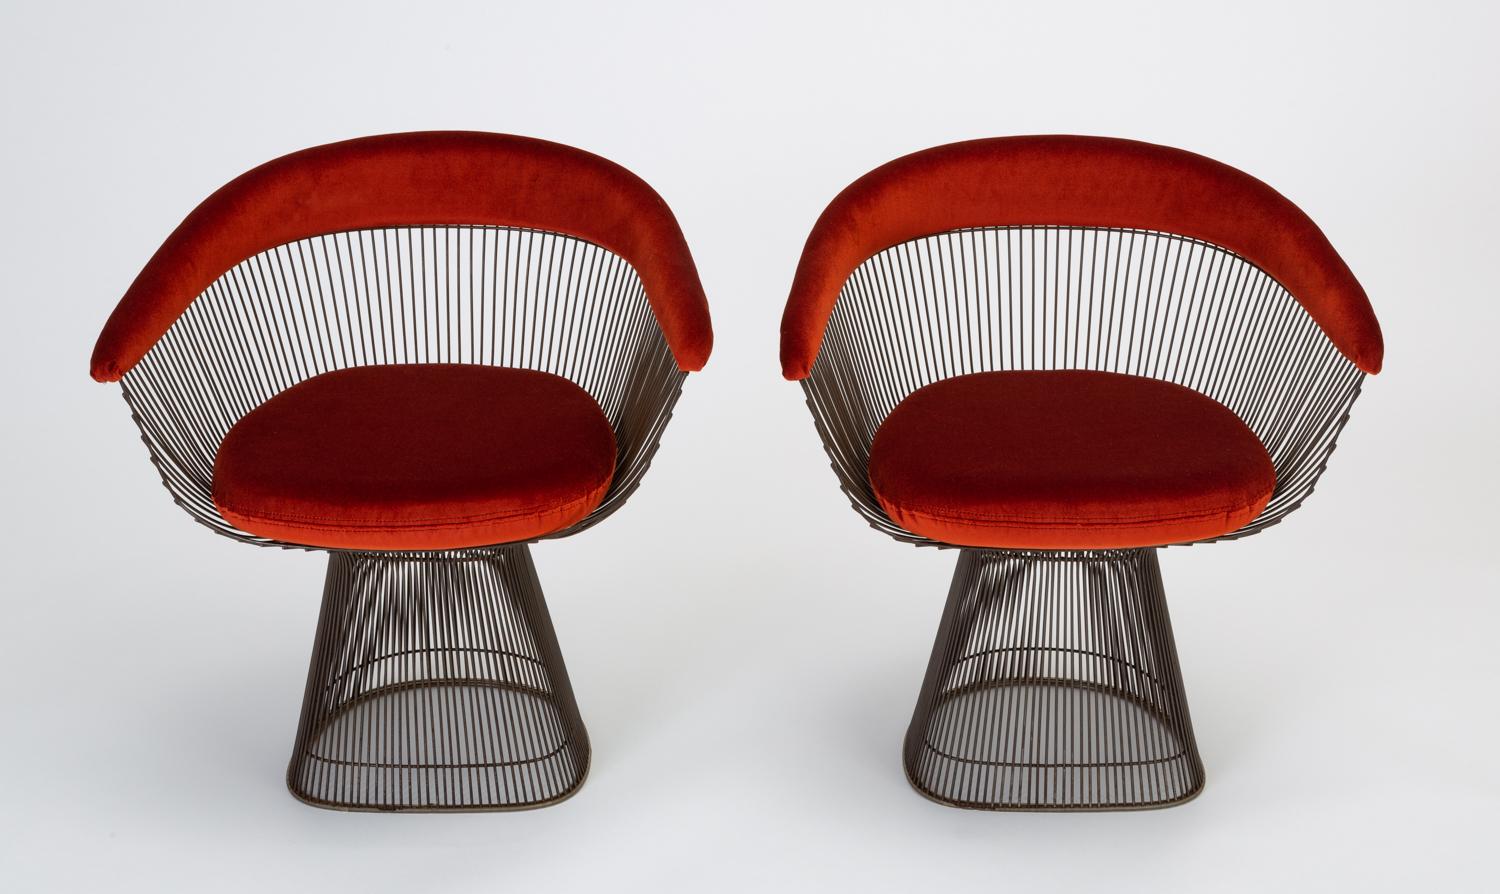 A pair of intricately minimal armchairs by Warren Platner for Knoll. Designed in 1966, the Platner collection featured designs defined by curved and welded steel spokes. The chairs have an hourglass shape with seat and curved back cushions in a